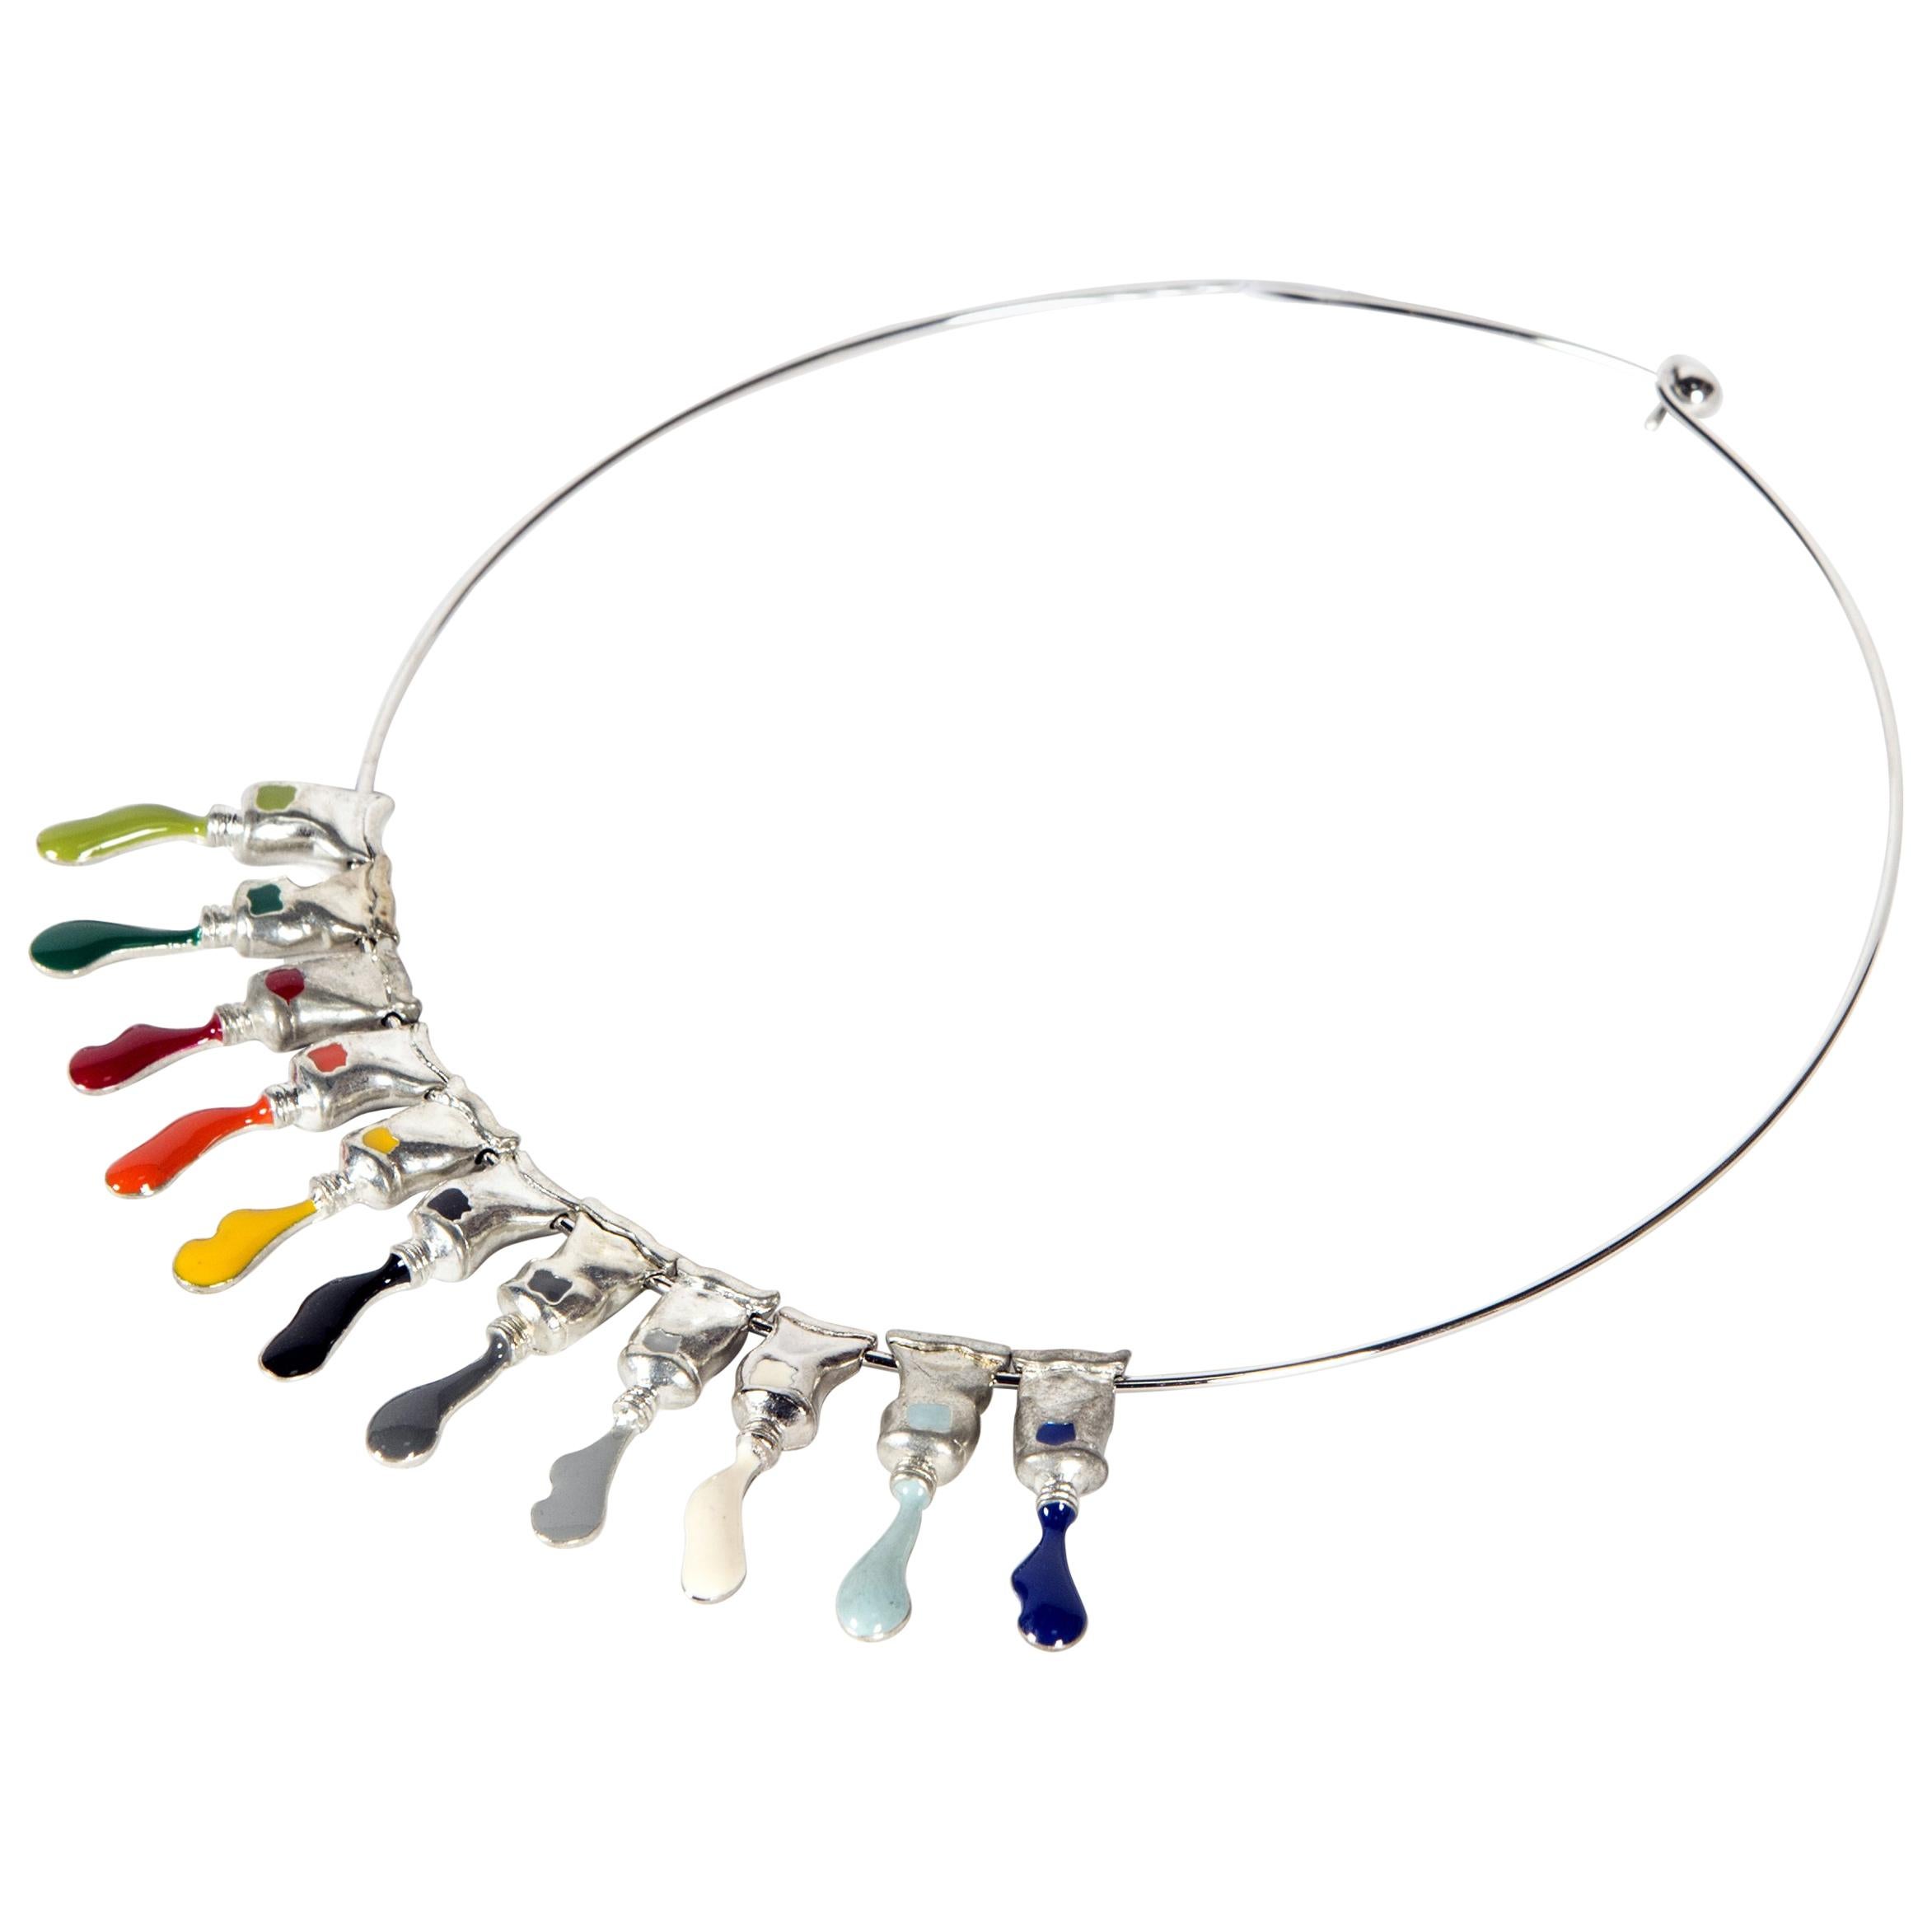 Necklace "Paint Tubes" by Artist Arman, 2001